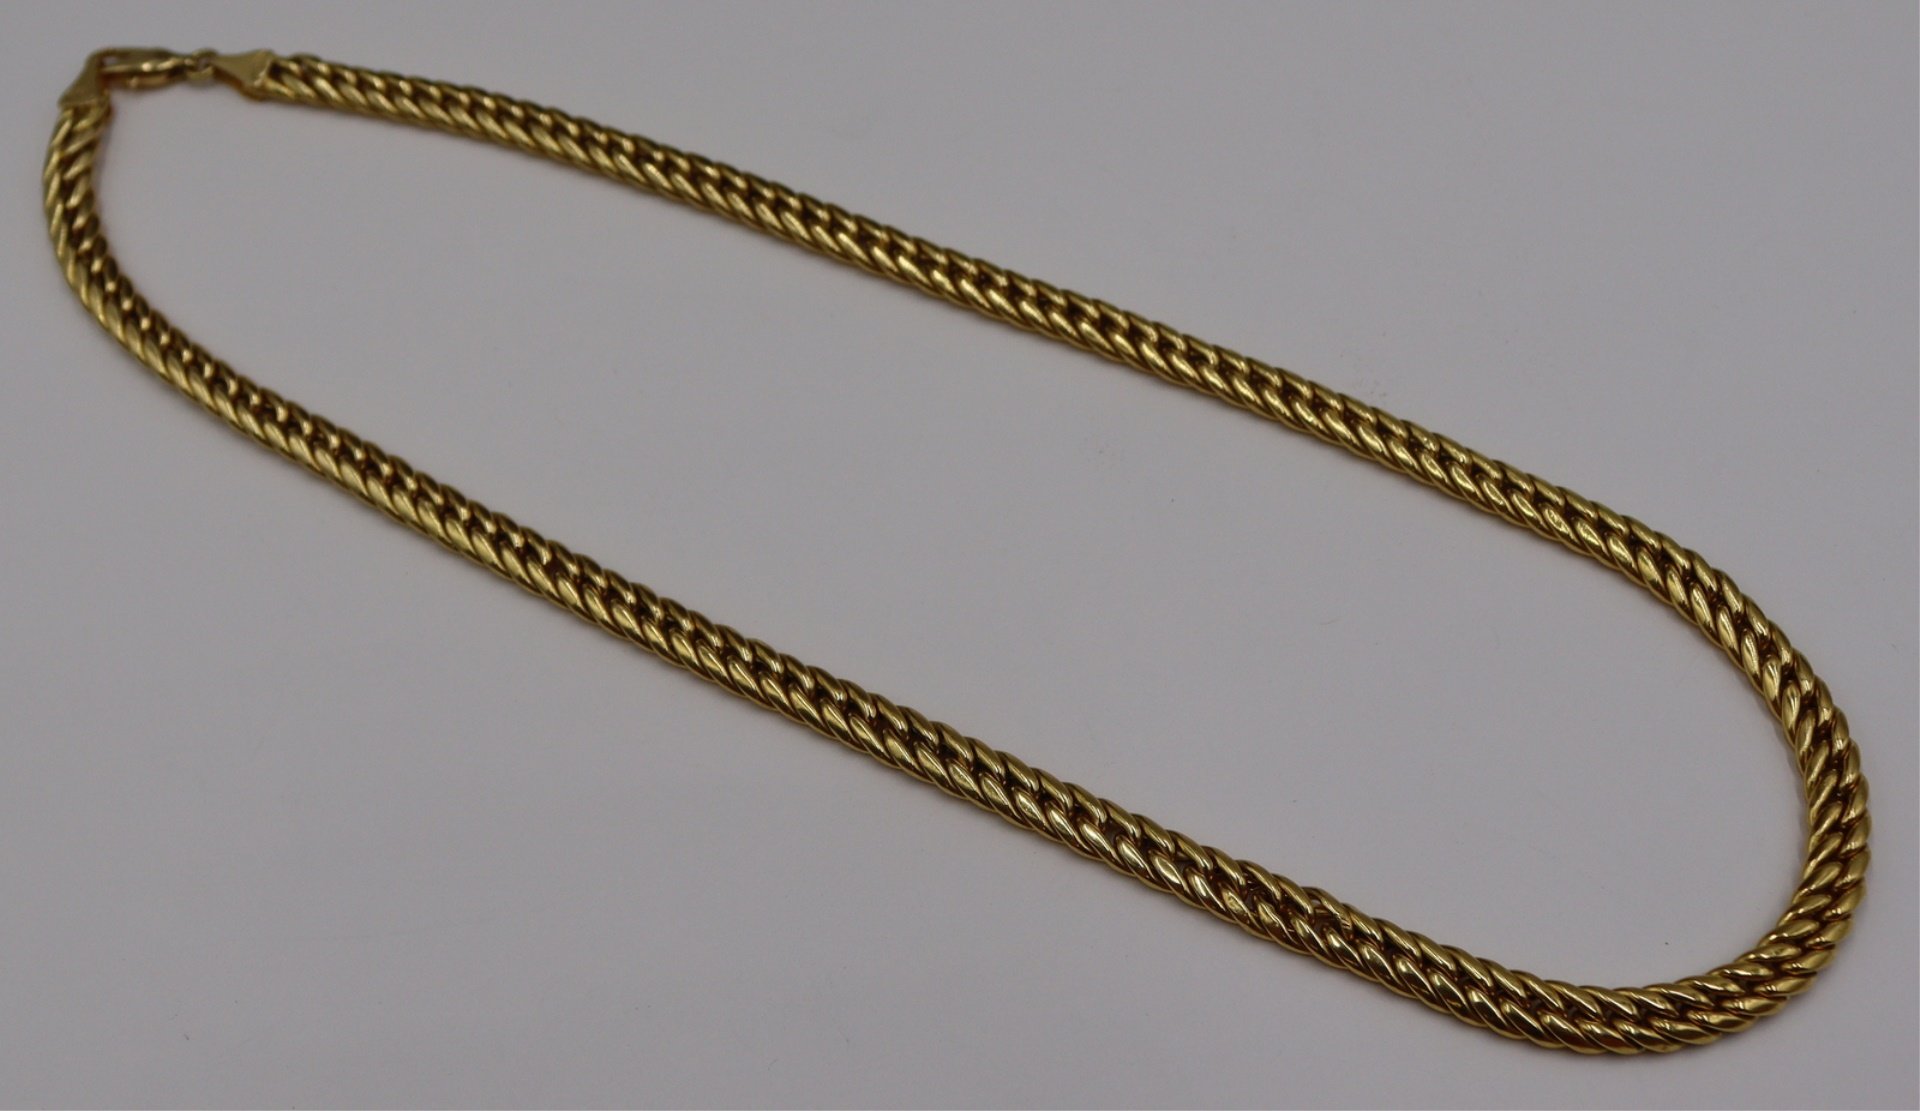 JEWELRY. 18KT GOLD CURB LINK CHAIN